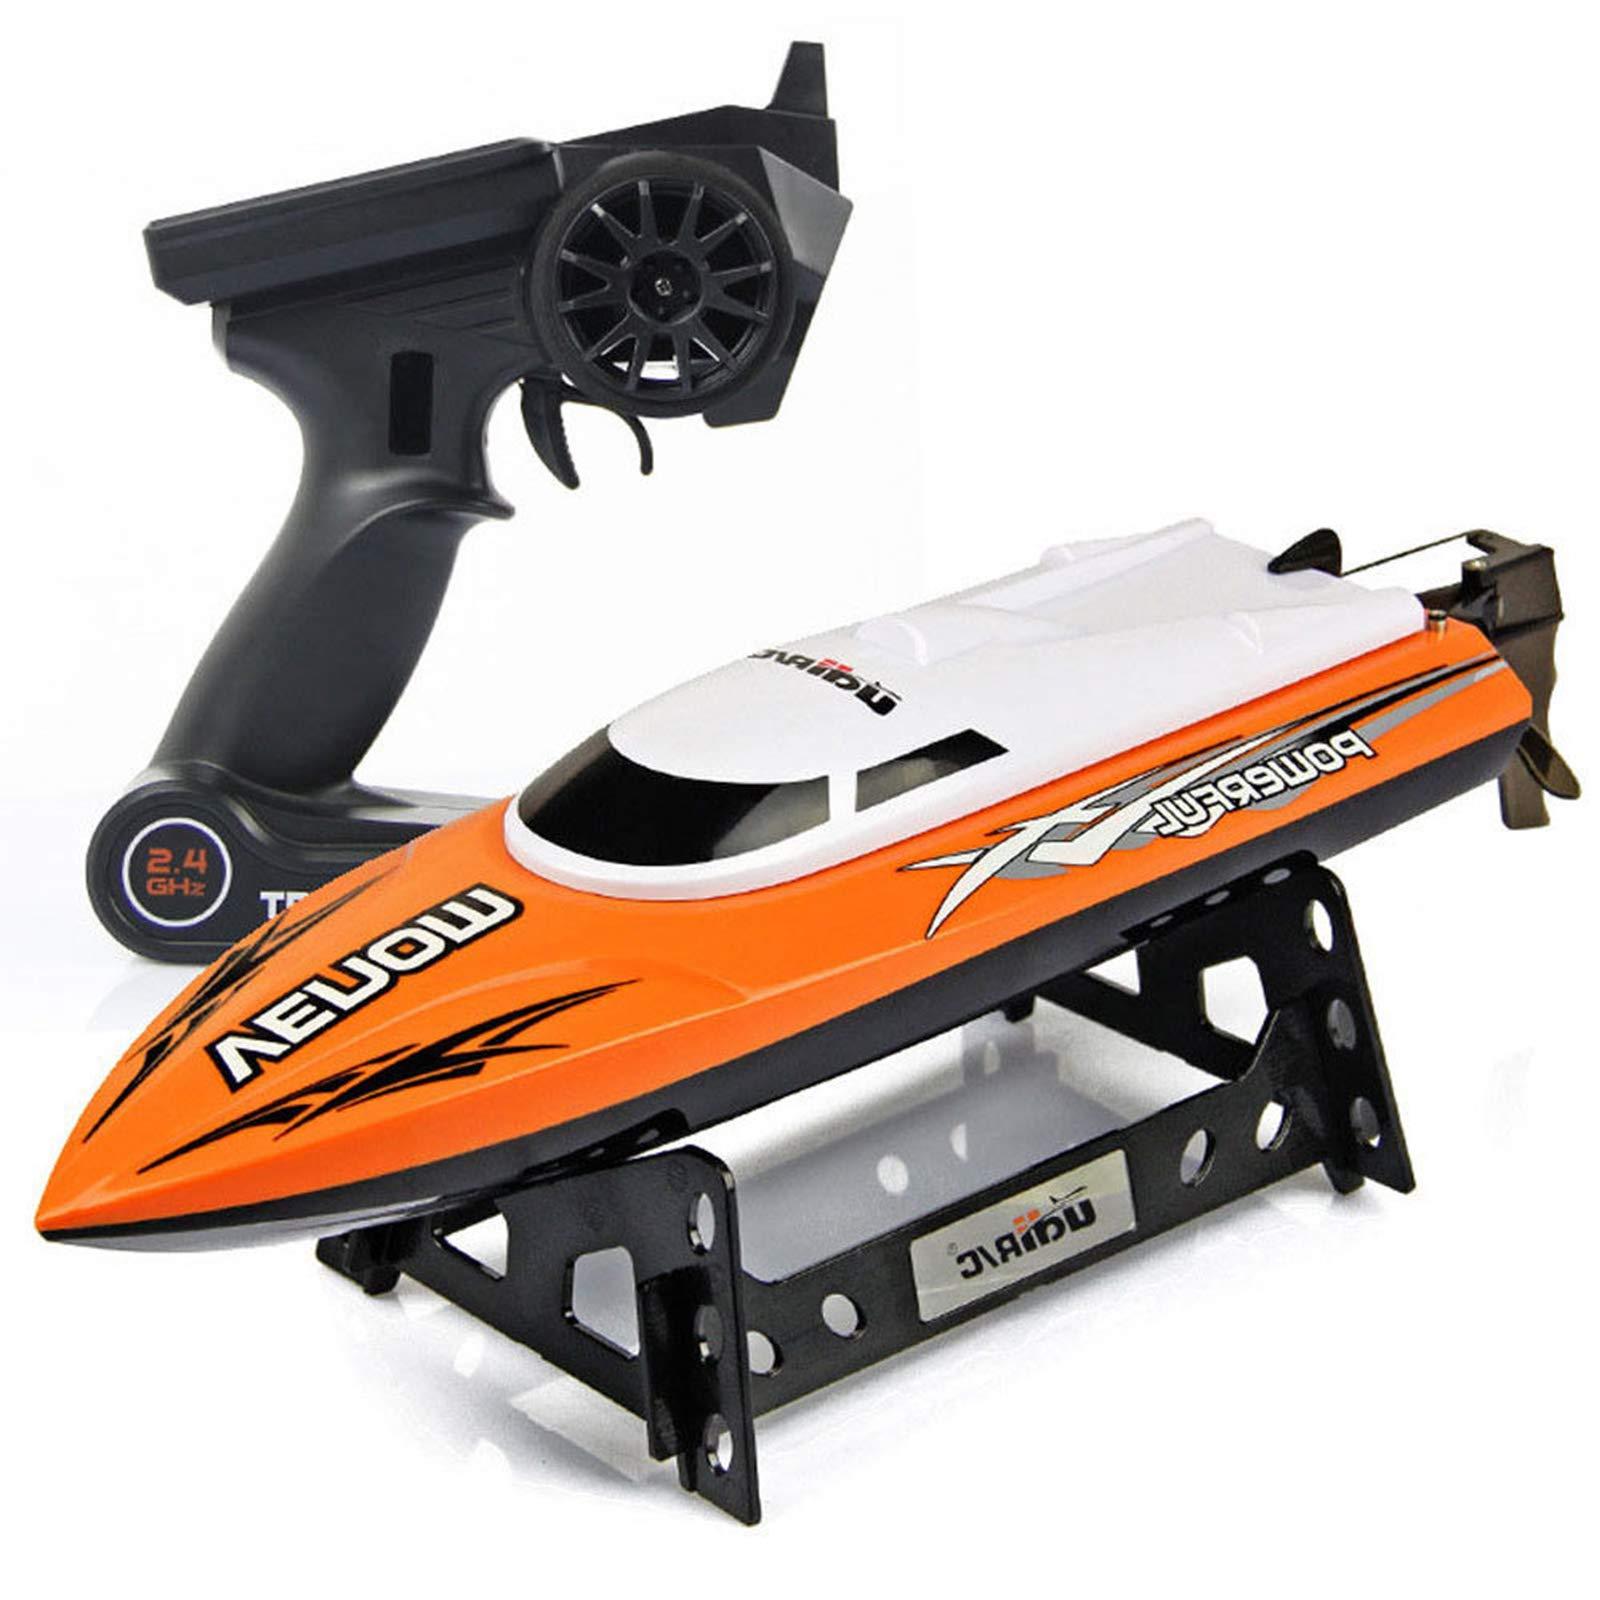 Electric Rc Speed Boat: Choosing the Perfect Electric RC Speed Boat: Consider These Essential Aspects